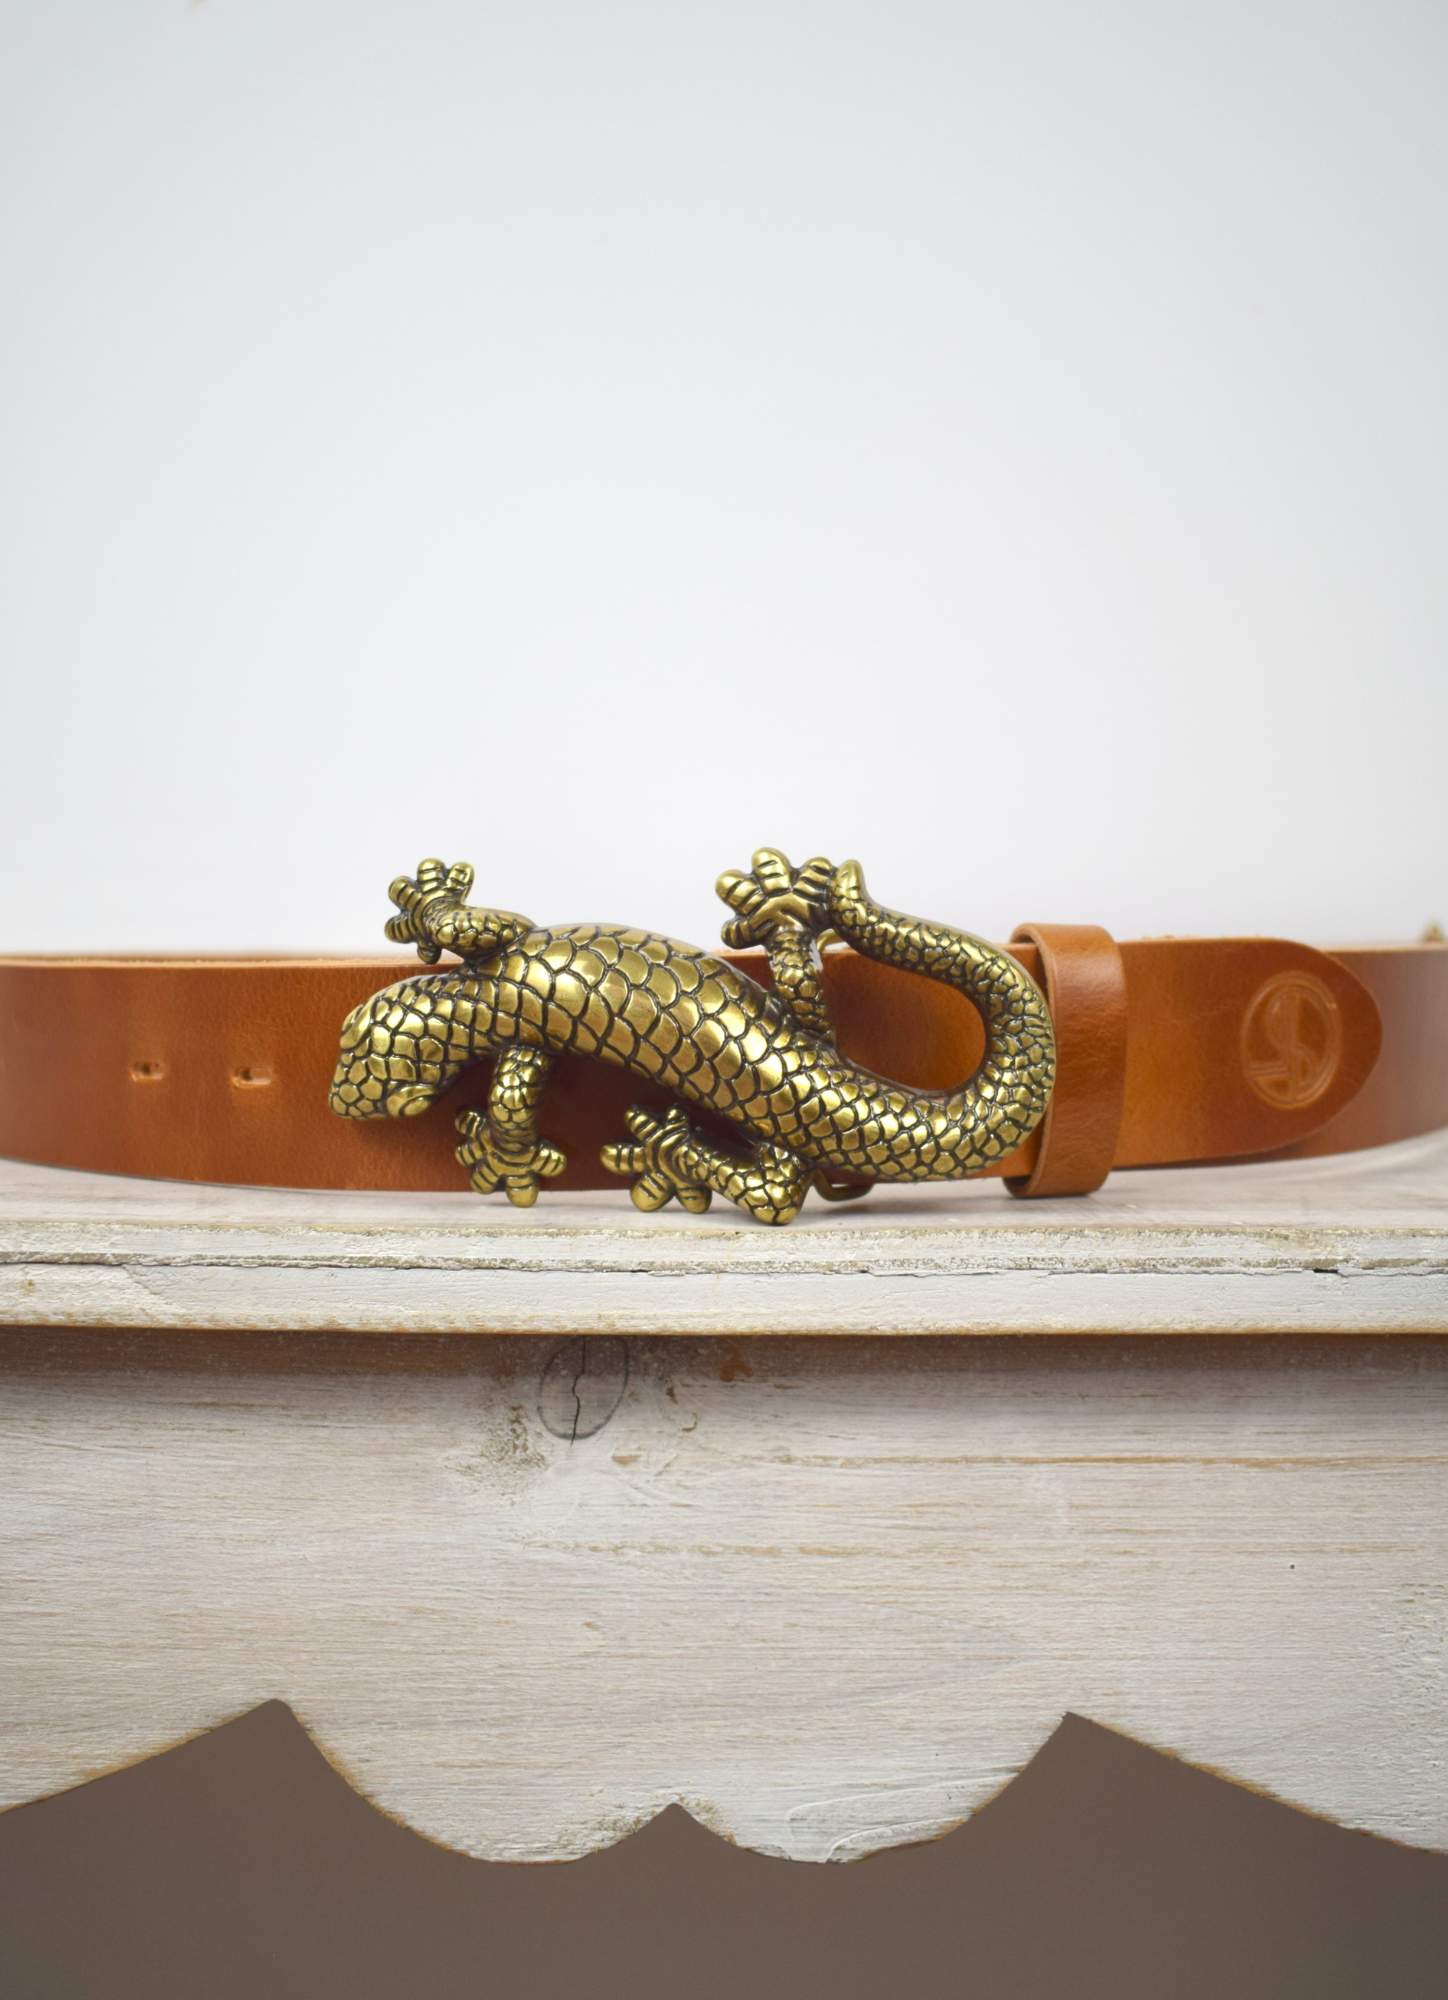 Tan leather bag strap with bronze salamander with lizard buckle